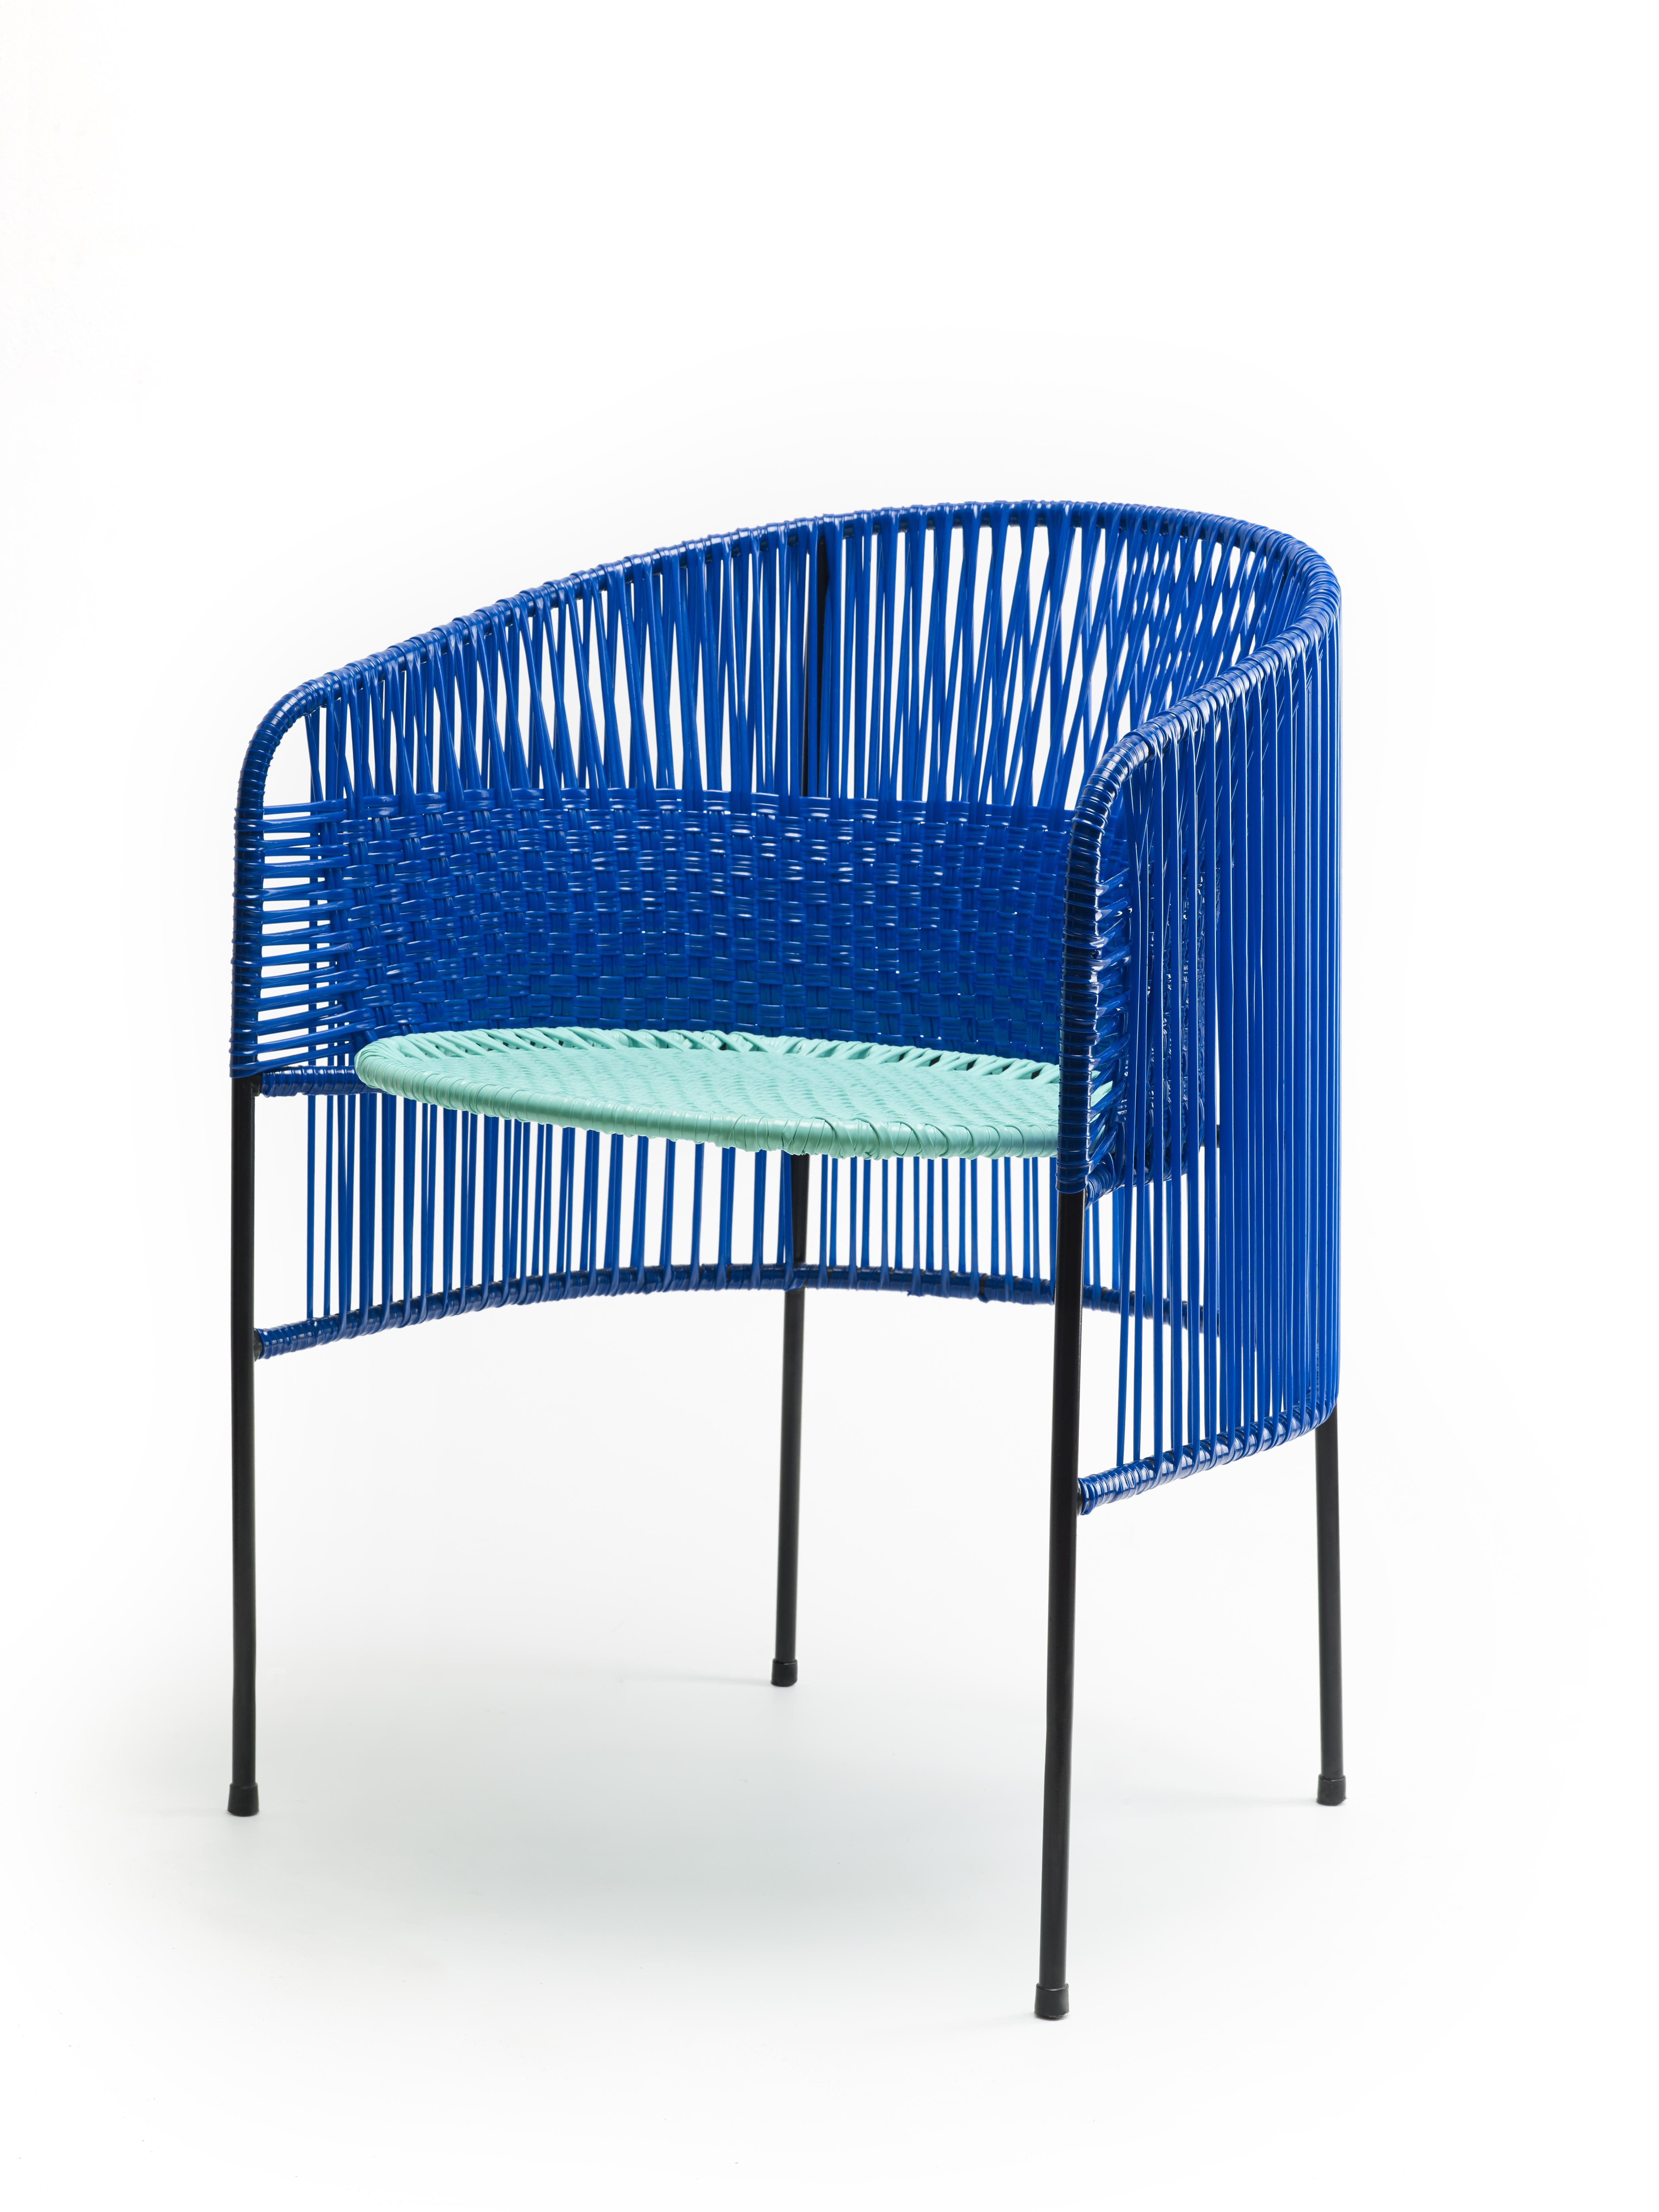 Set of 2 blue caribe lounge chair by Sebastian Herkner
Materials: galvanized and powder-coated tubular steel. PVC strings are made from recycled plastic.
Technique: Made from recycled plastic and weaved by local craftspeople in Colombia.